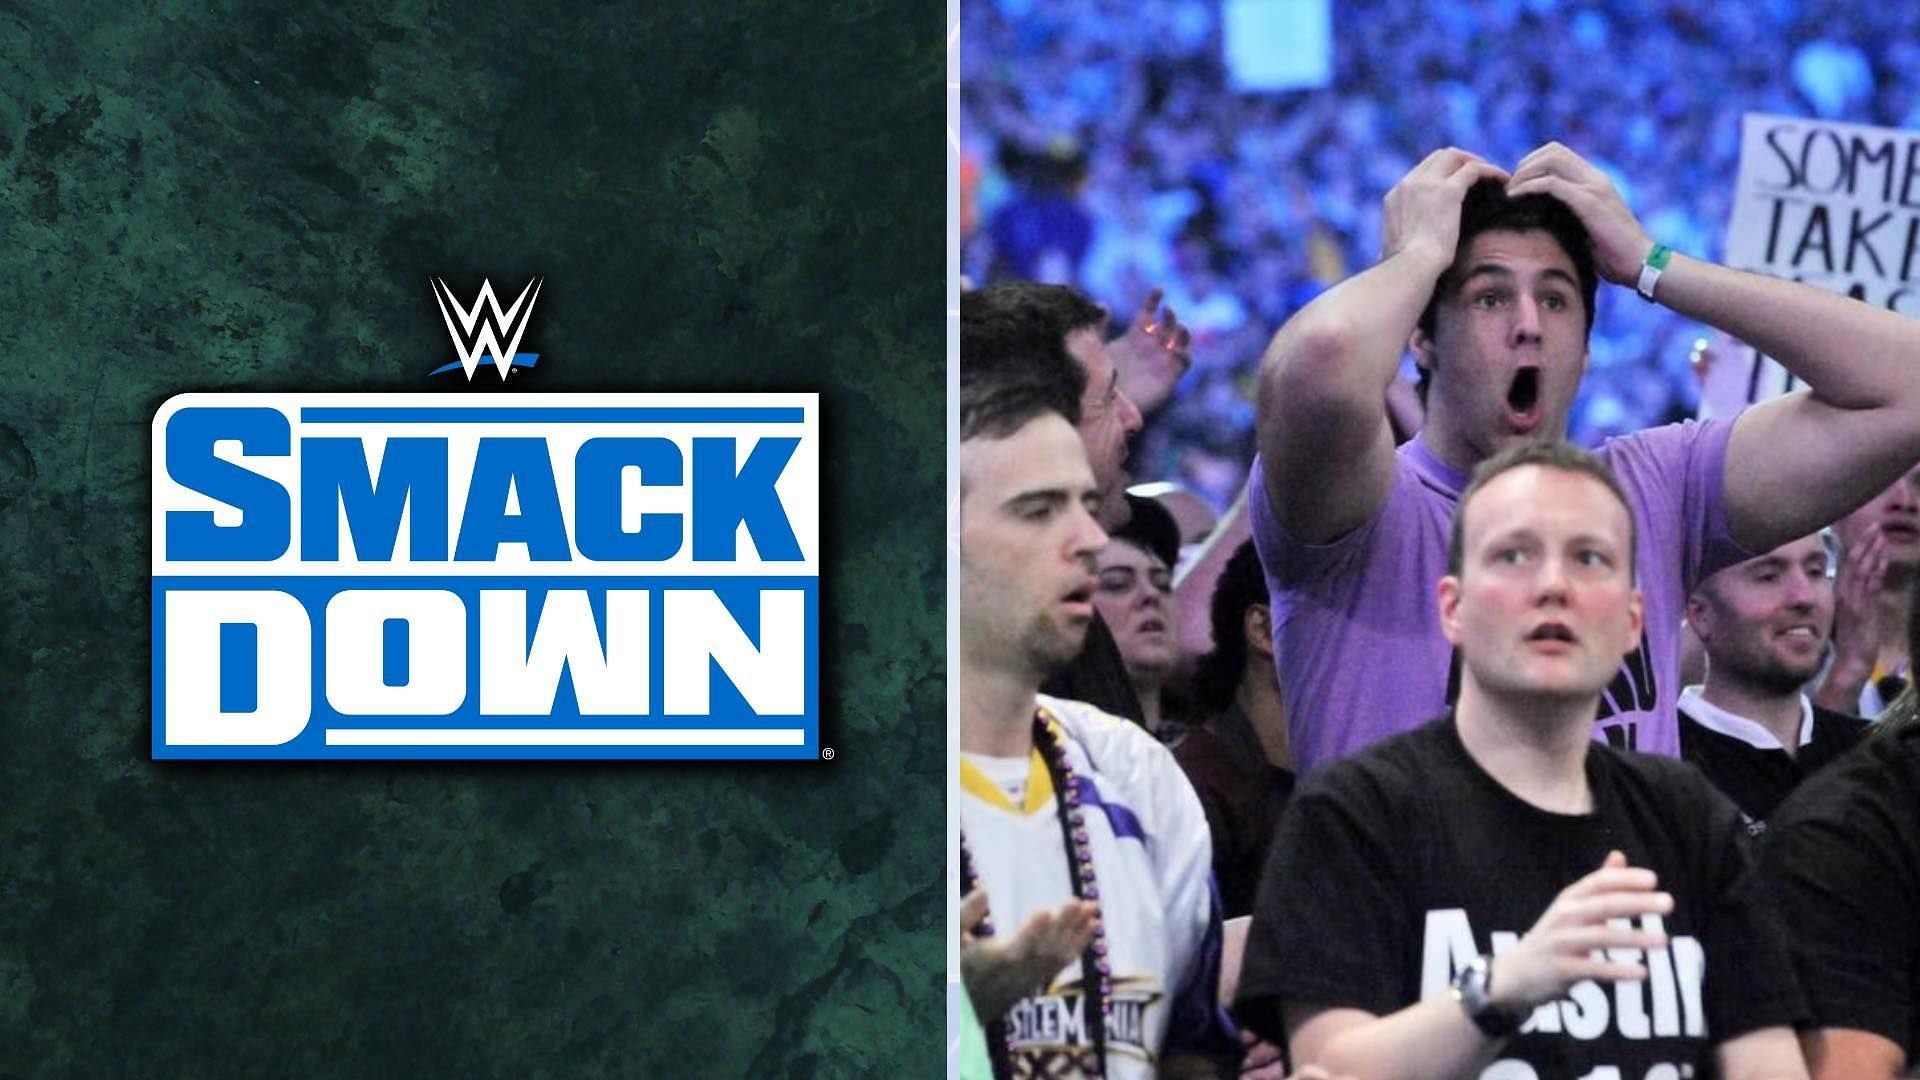 WWE SmackDown this week was live from the Giant Center in Hershey, Pennsylvania